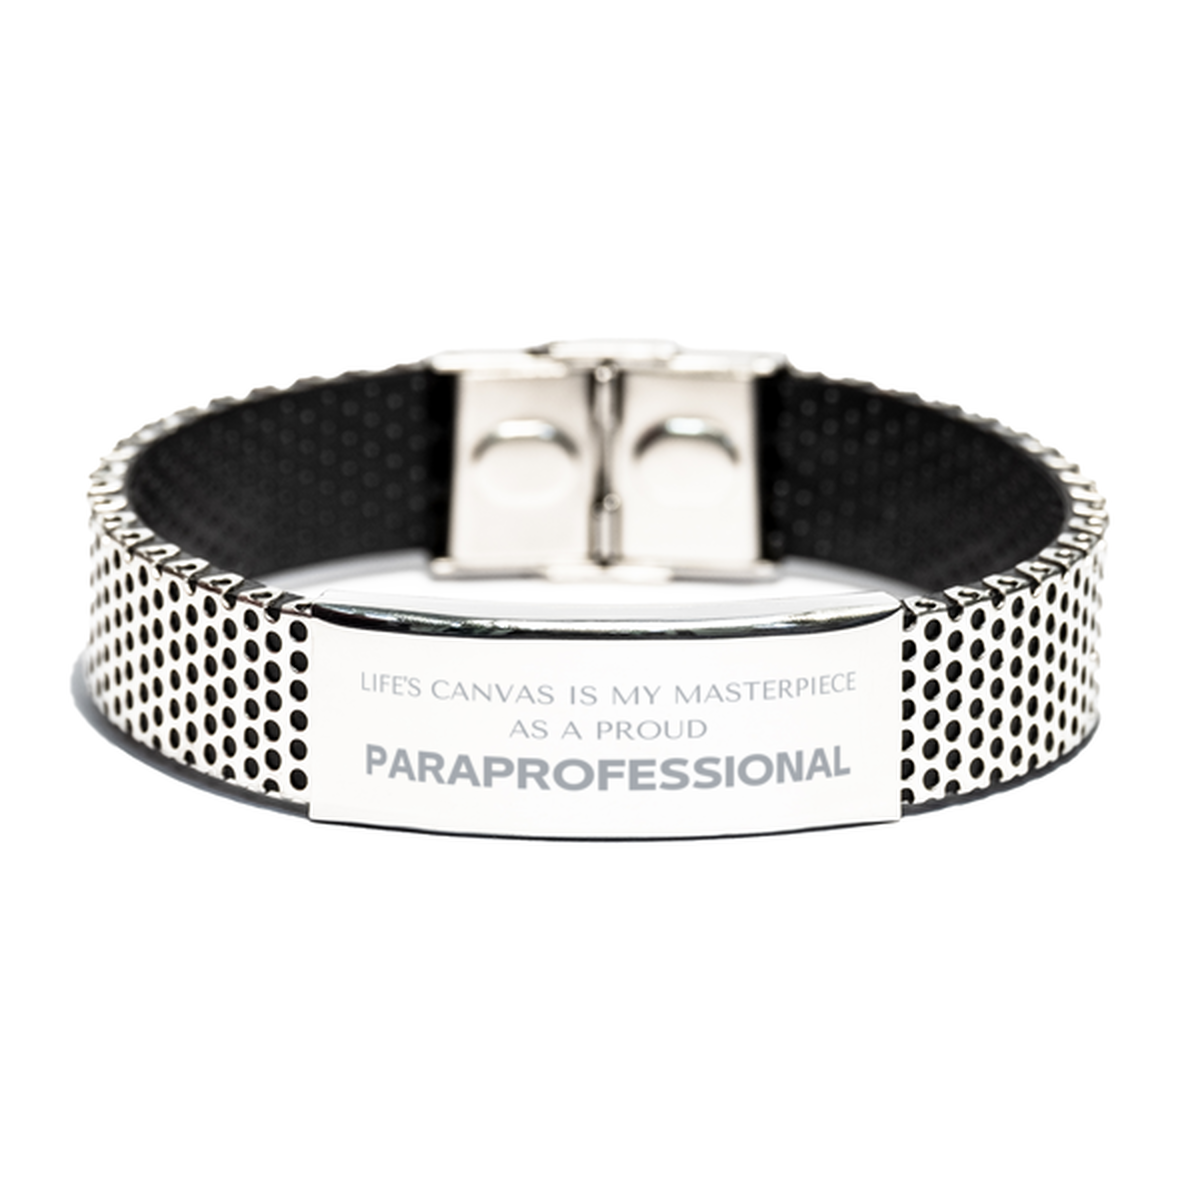 Proud Paraprofessional Gifts, Life's canvas is my masterpiece, Epic Birthday Christmas Unique Stainless Steel Bracelet For Paraprofessional, Coworkers, Men, Women, Friends